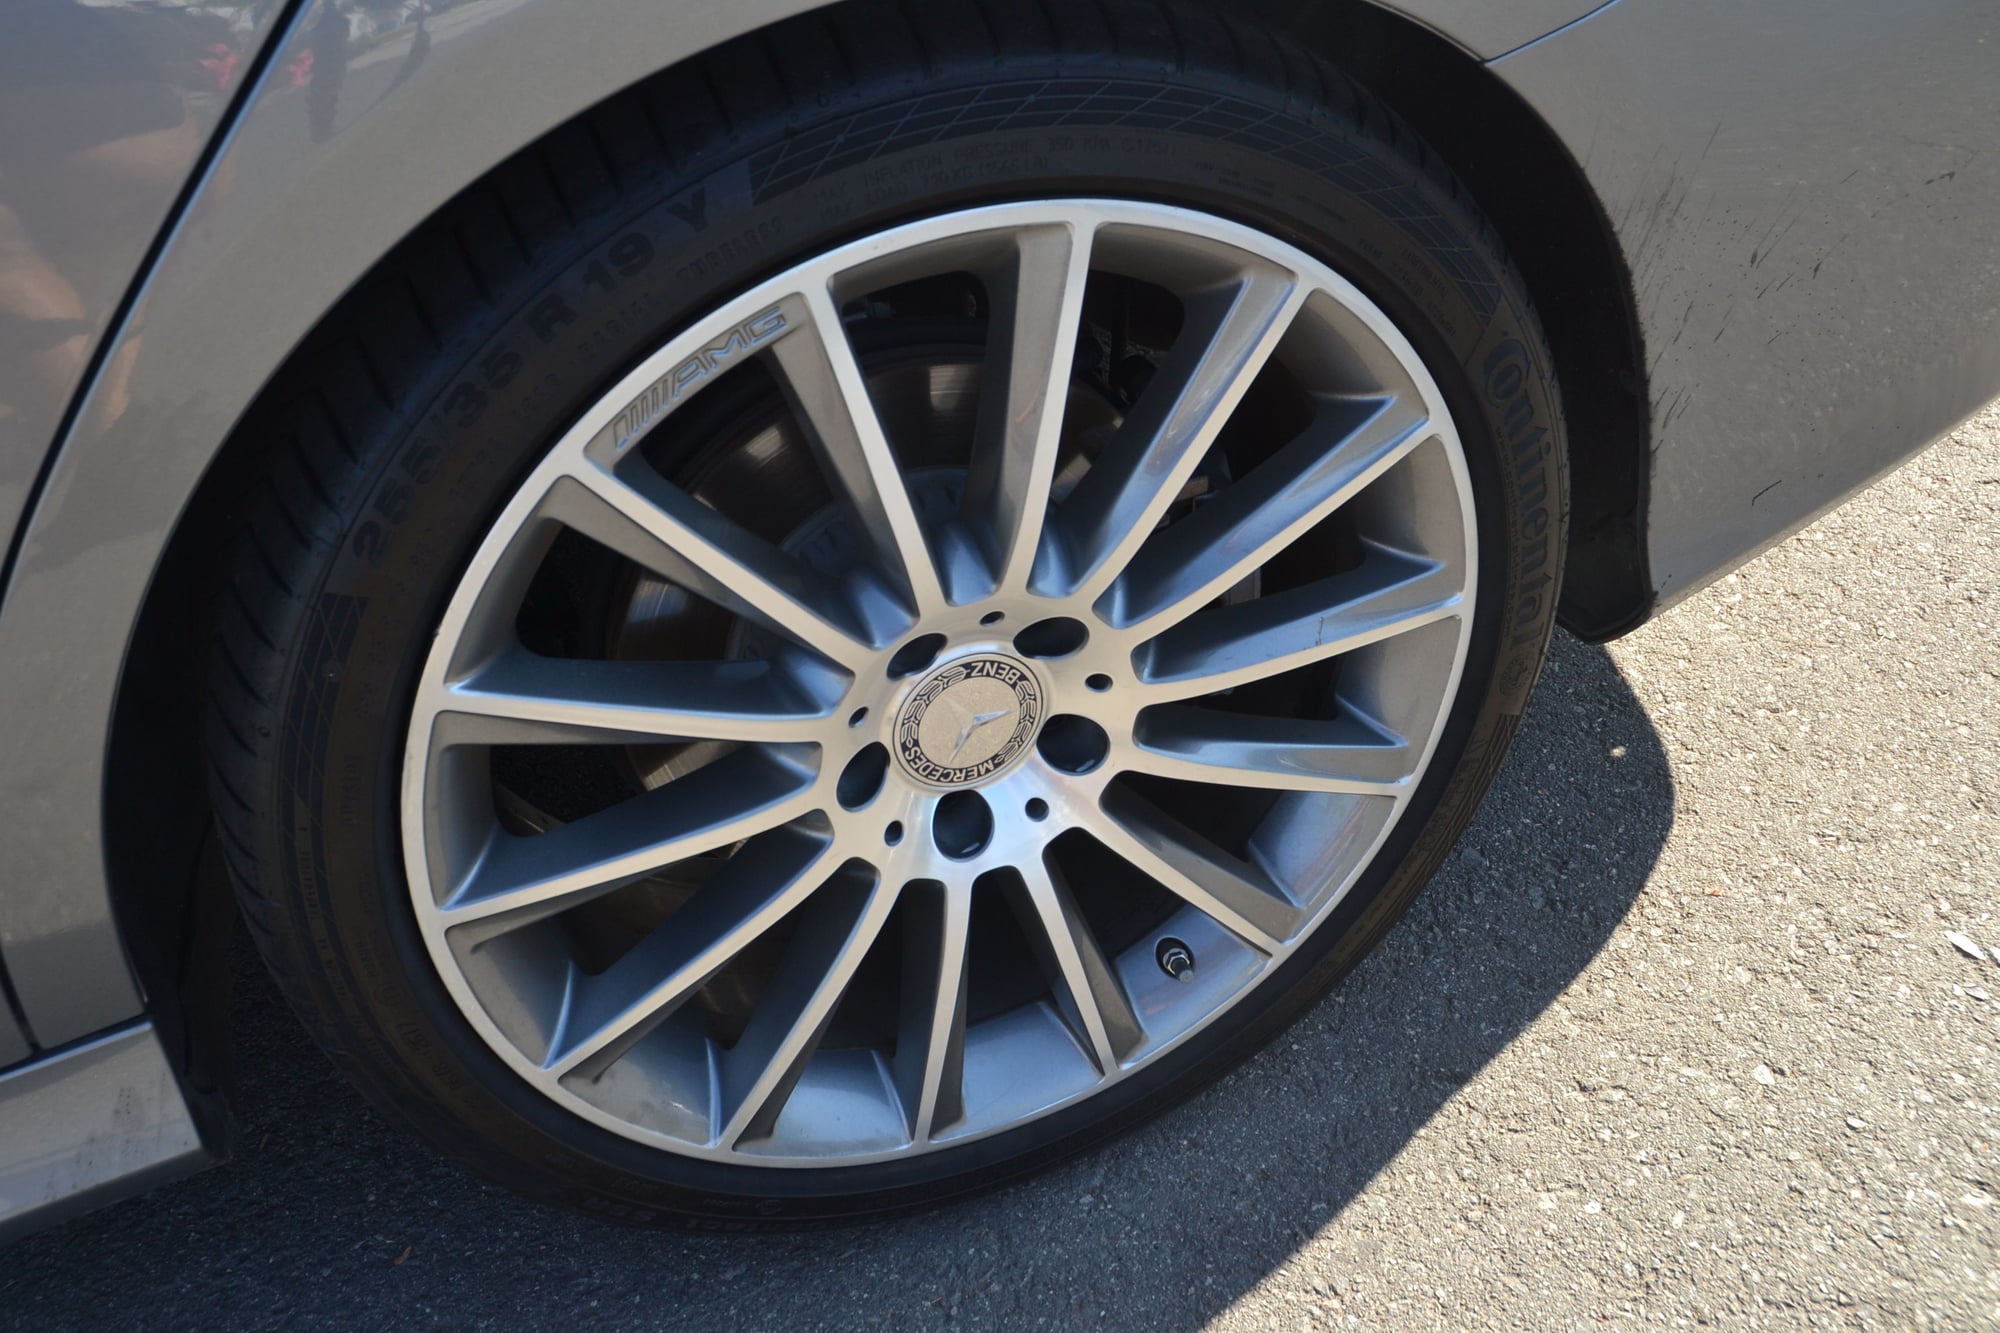 Wheels and Tires/Axles - LIKE NEW, full set OF Continental ContiSport Contact SSR RUNFLAT OEM TIRES - Used - All Years Mercedes-Benz 300C - All Years Any Make All Models - Orange, CA 92869, United States